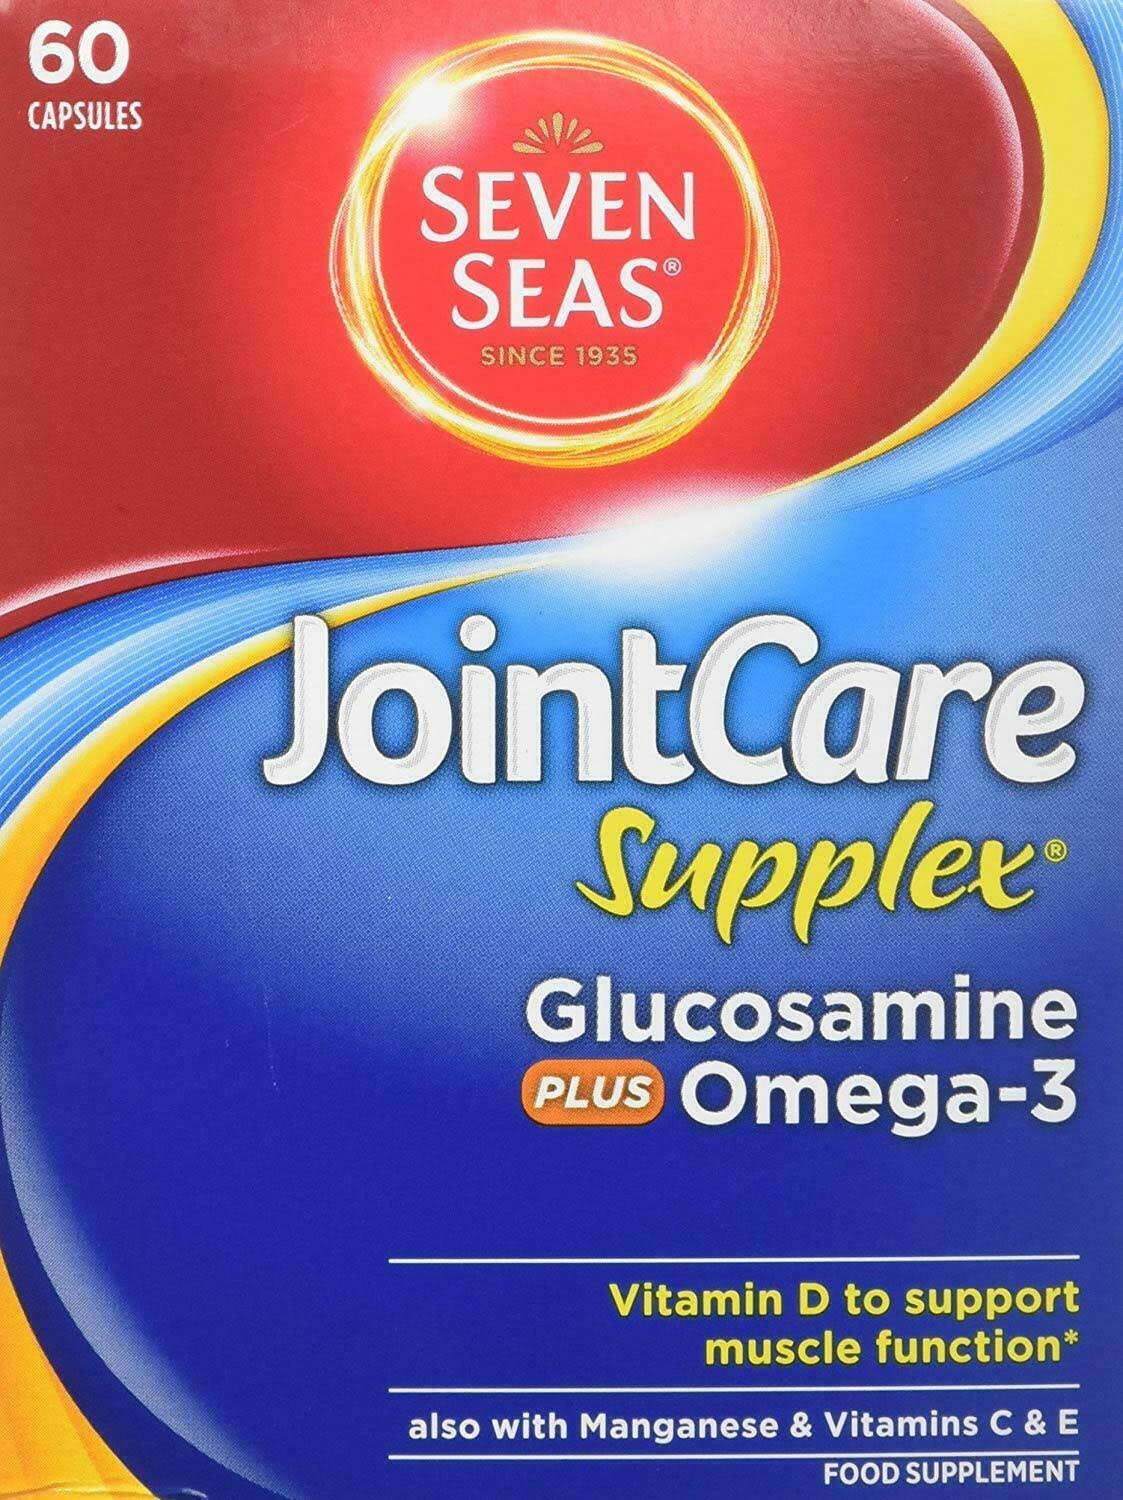 Seven Seas Joint Care Supplex Glucosamine Plus Omega-3 Food Supplement - 60 Pack